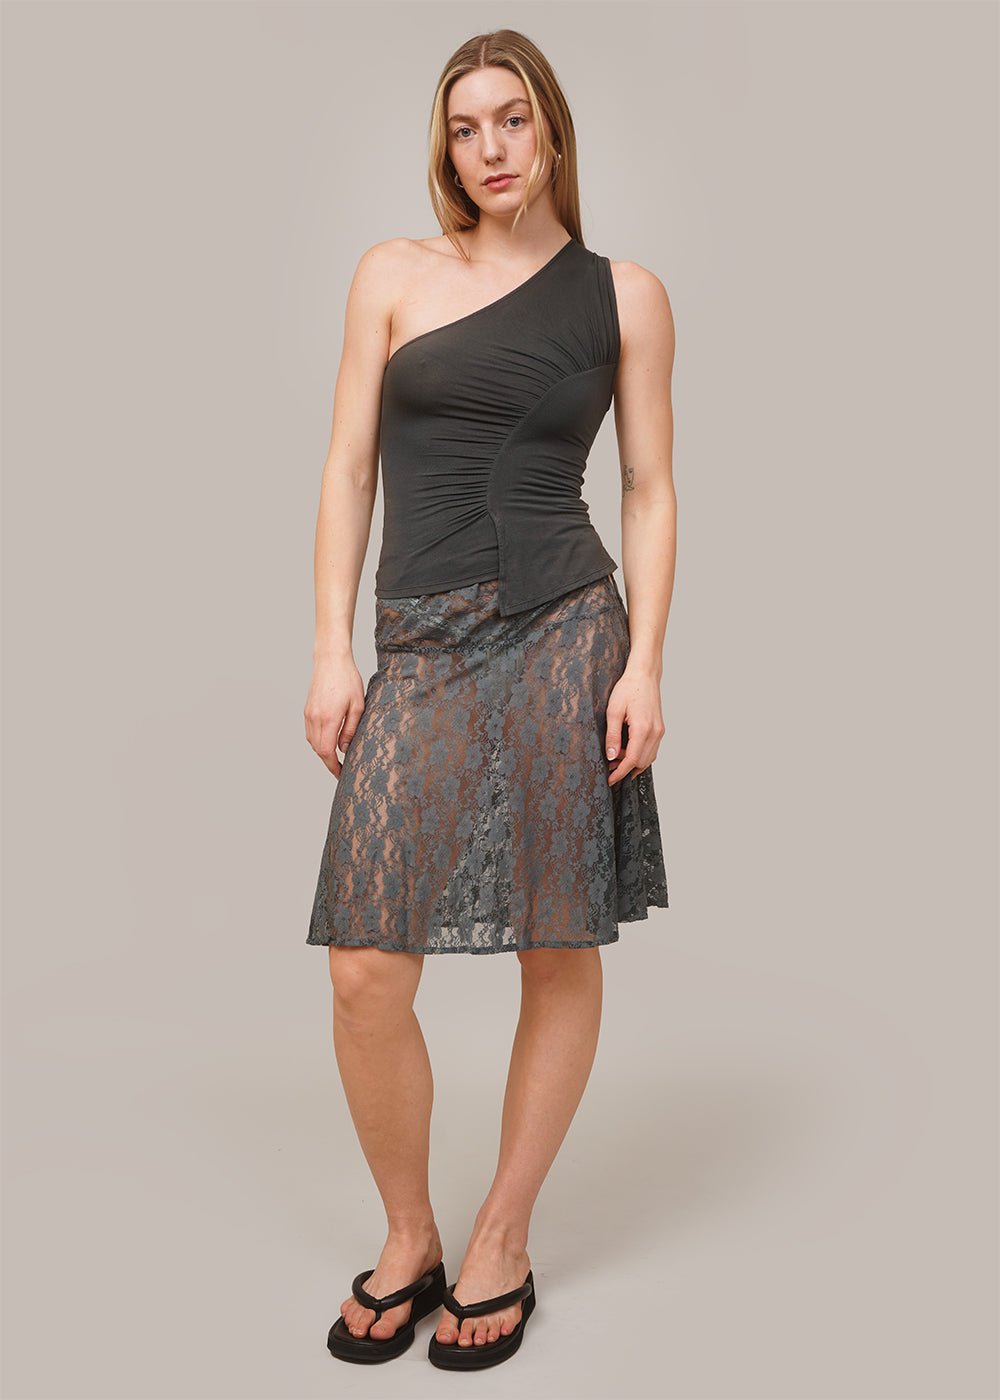 Belle The Label Slate Sakae Top - New Classics Studios Sustainable Ethical Fashion Canada